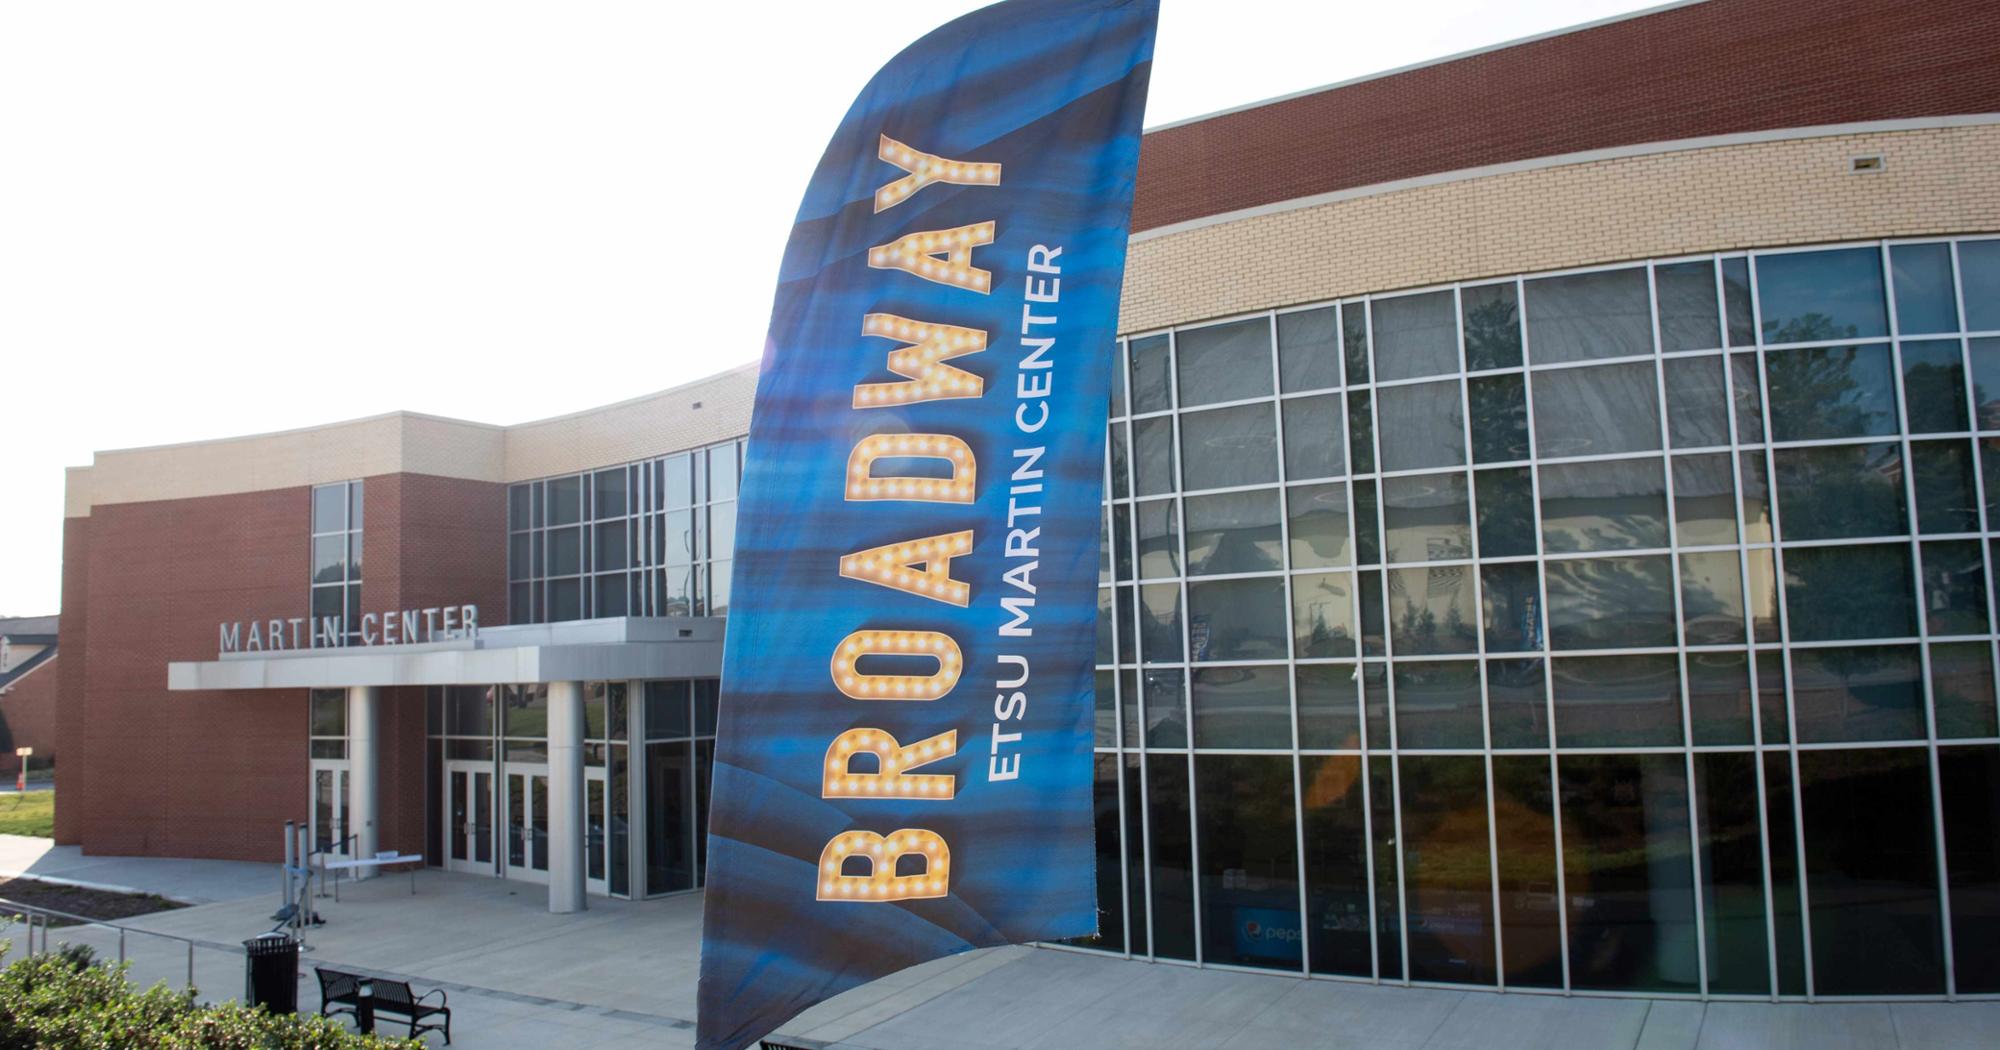 The Broadway flag outside the Martin Center.